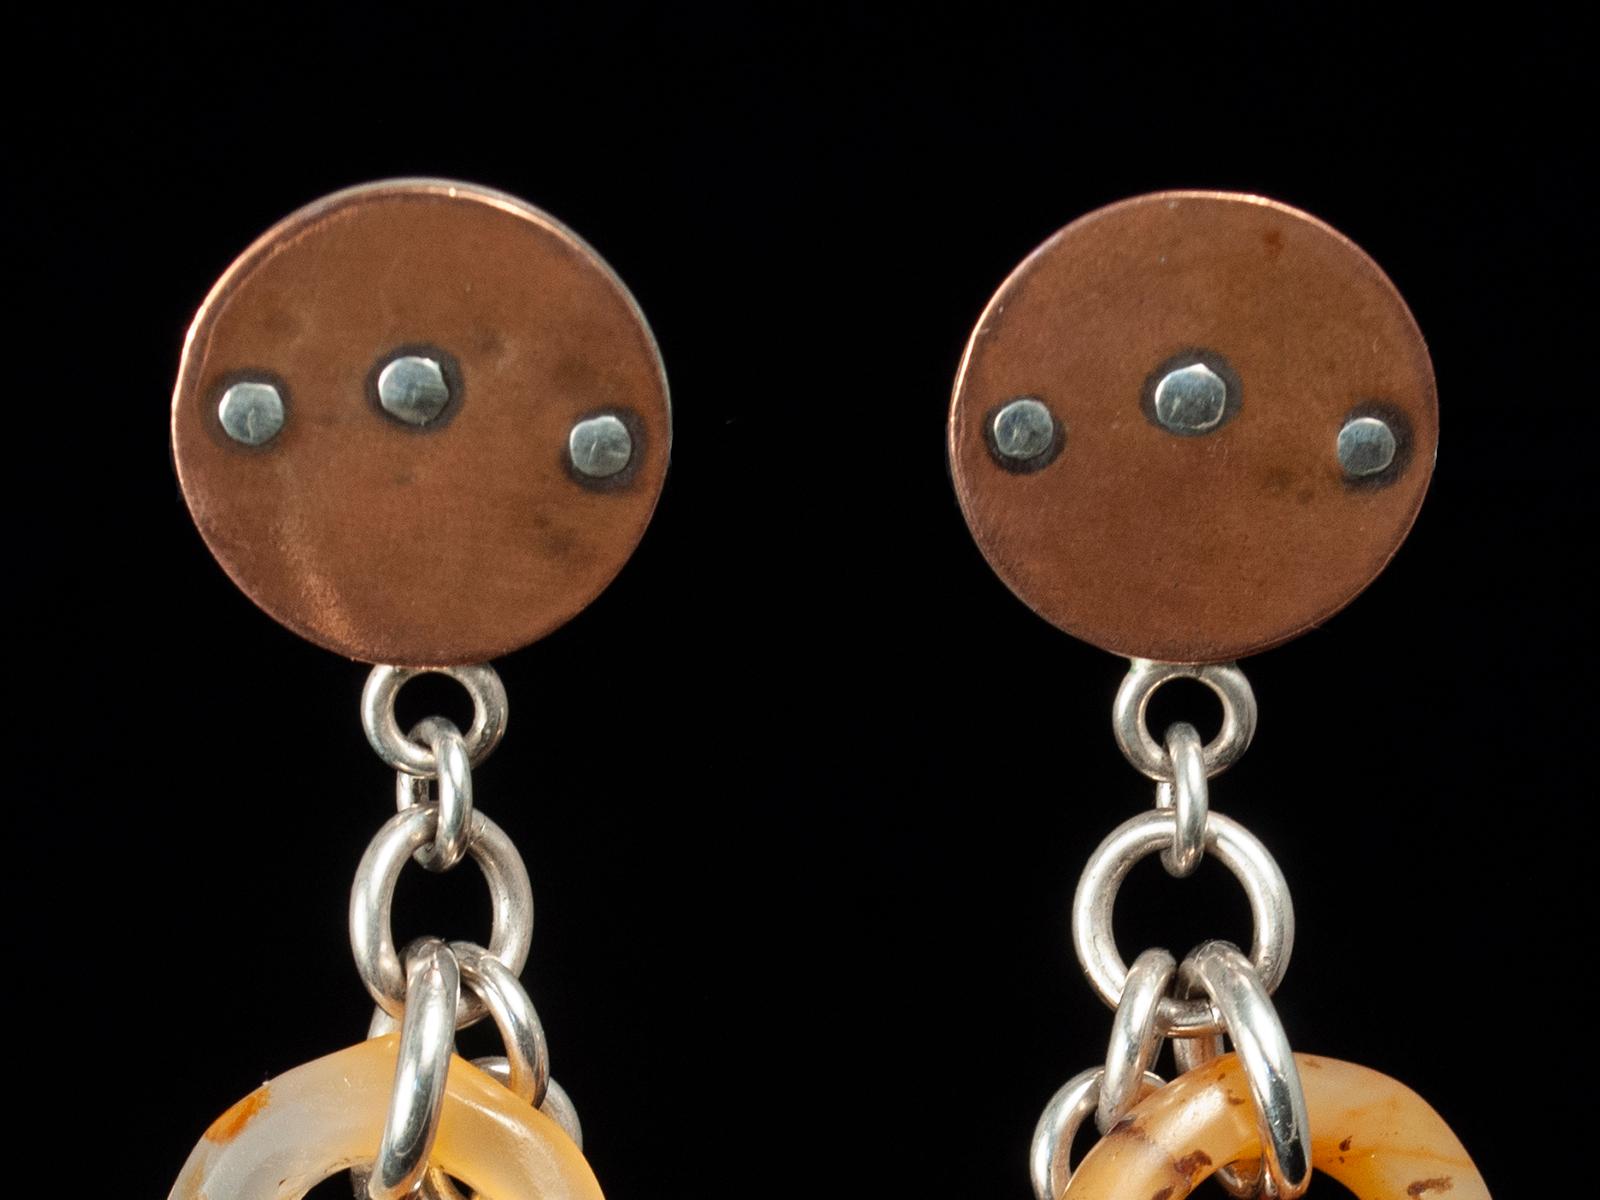 20th Century Agate and Silver earrings by Jewels

Four rare hair ornaments carved in agate, called Tanfouk or Talhakimt, drop from a copper and silver disk for a pair of lightweight earrings. These ornaments were worn by women in Mali and